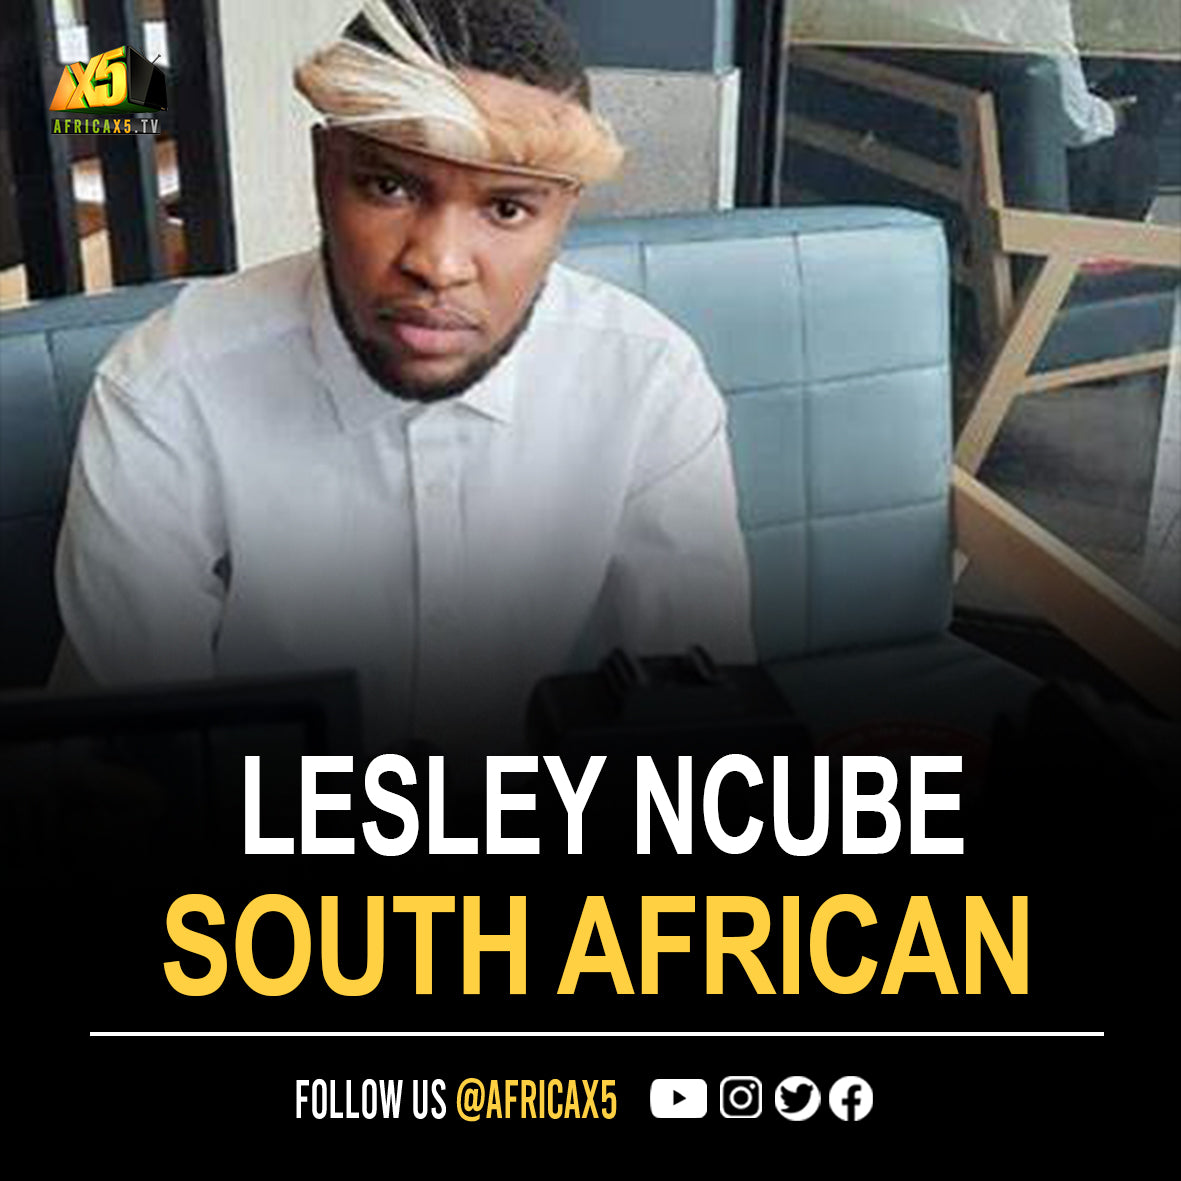 28-year-old South African entrepreneur Lesley Ncube launched his own smartphone